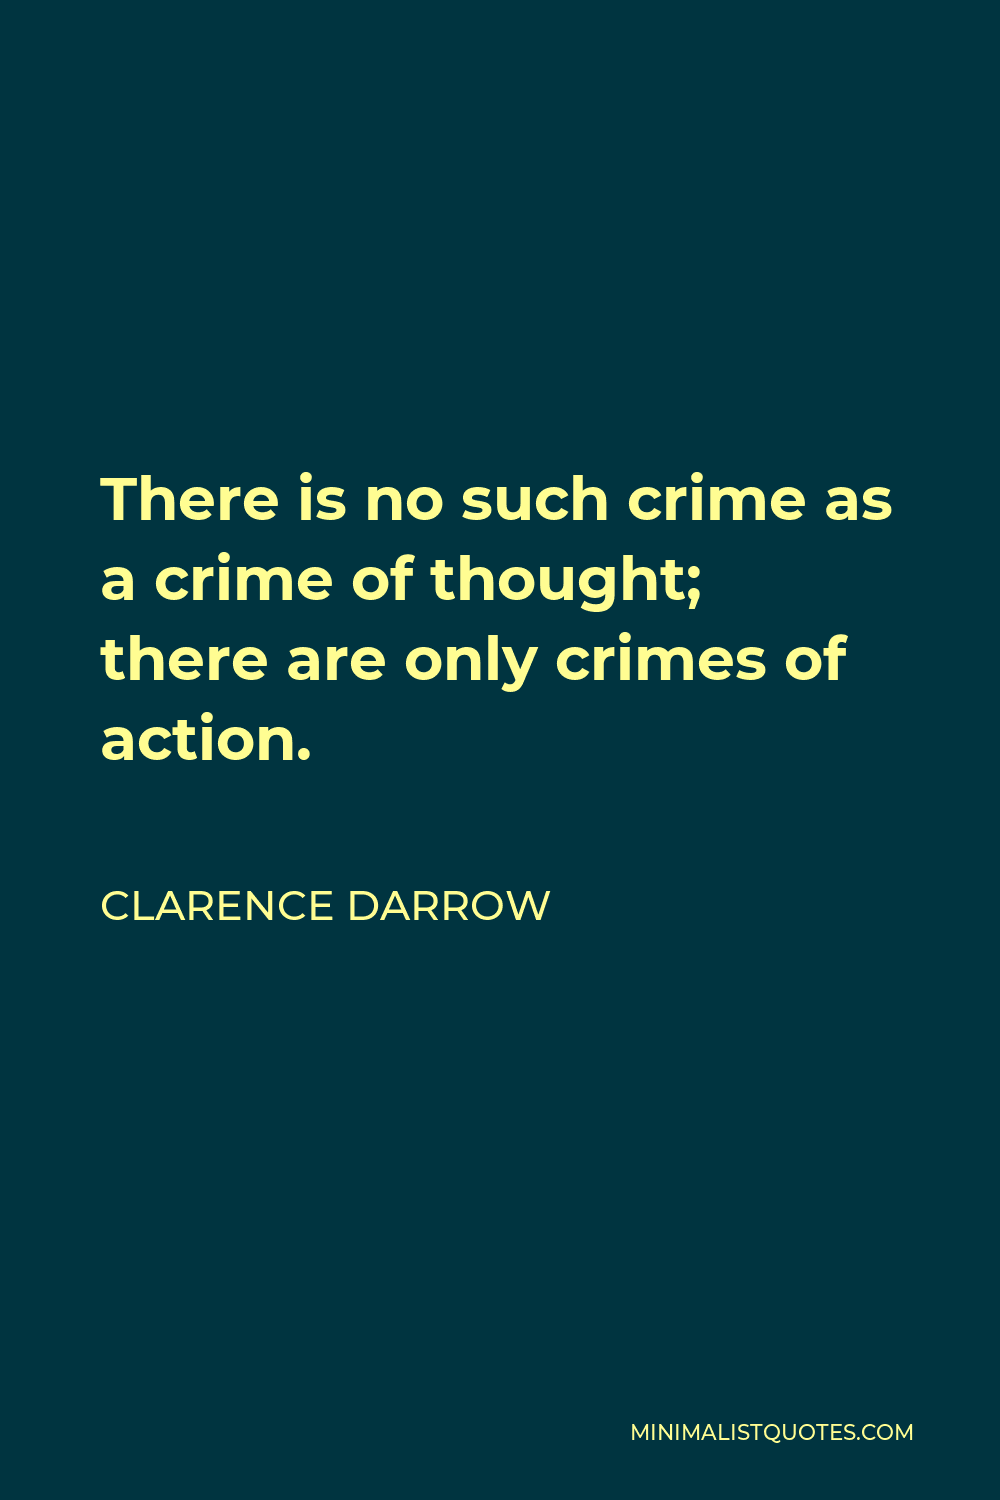 Clarence Darrow Quote - There is no such crime as a crime of thought; there are only crimes of action.